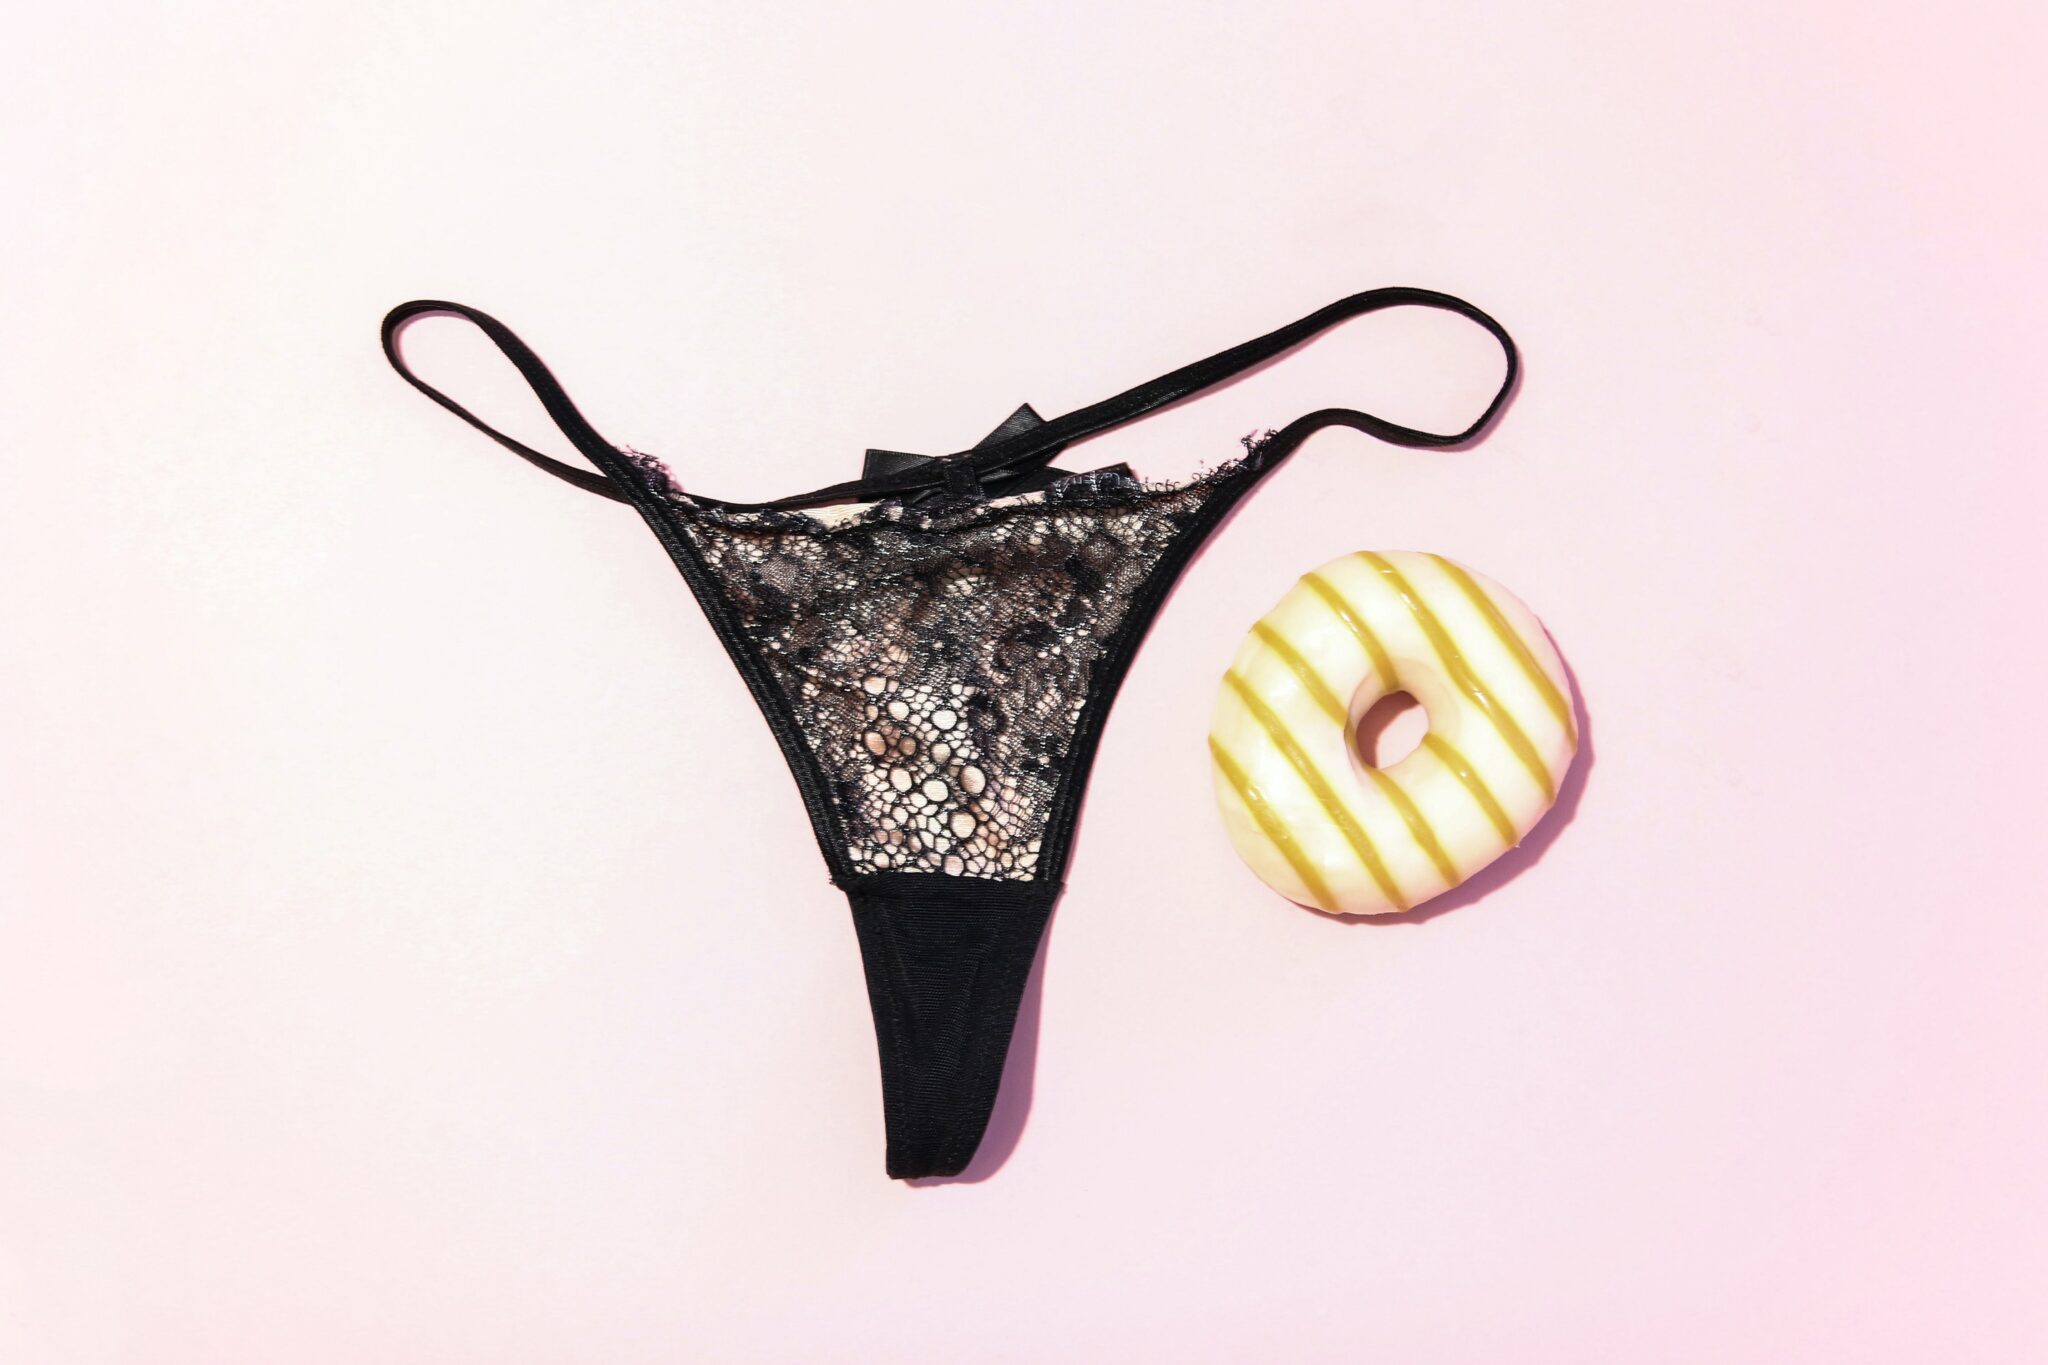 A pair of black lacy panties next to a donut.